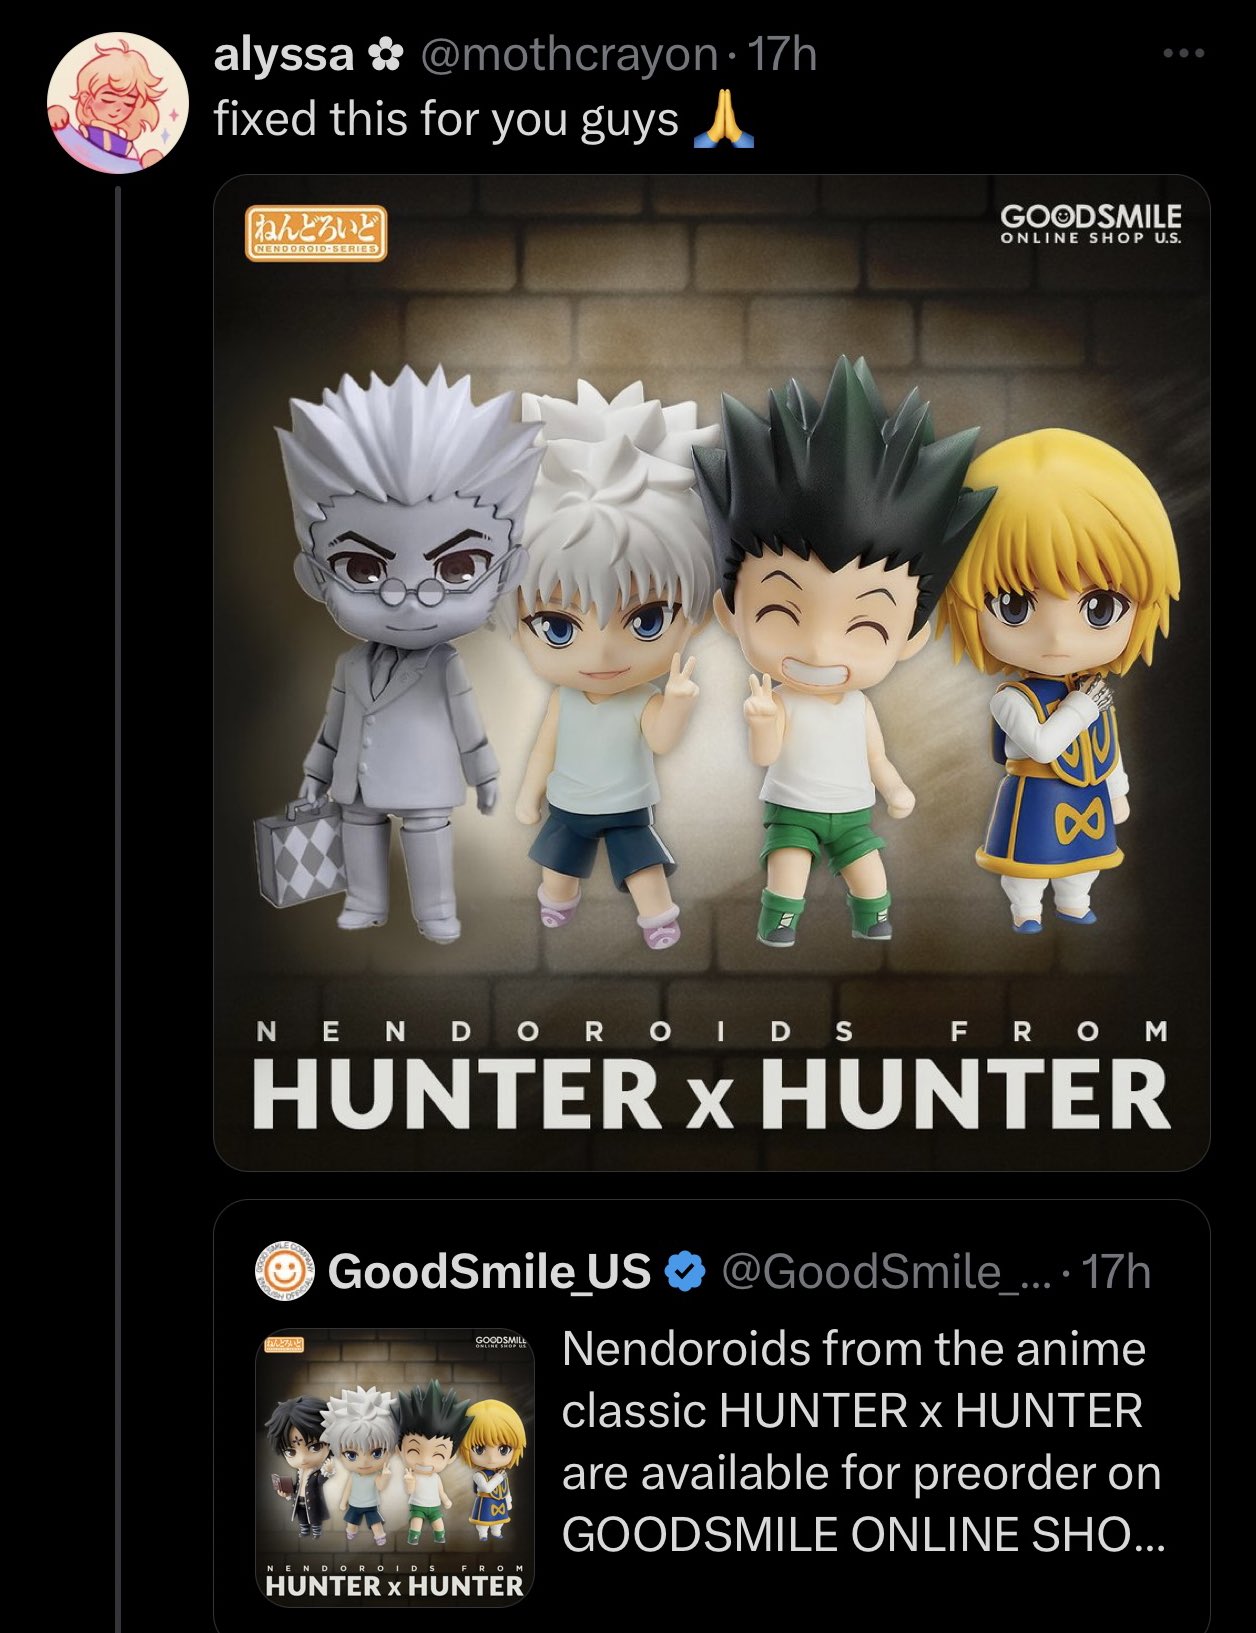 Nendoroids from the anime classic HUNTER x HUNTER are available